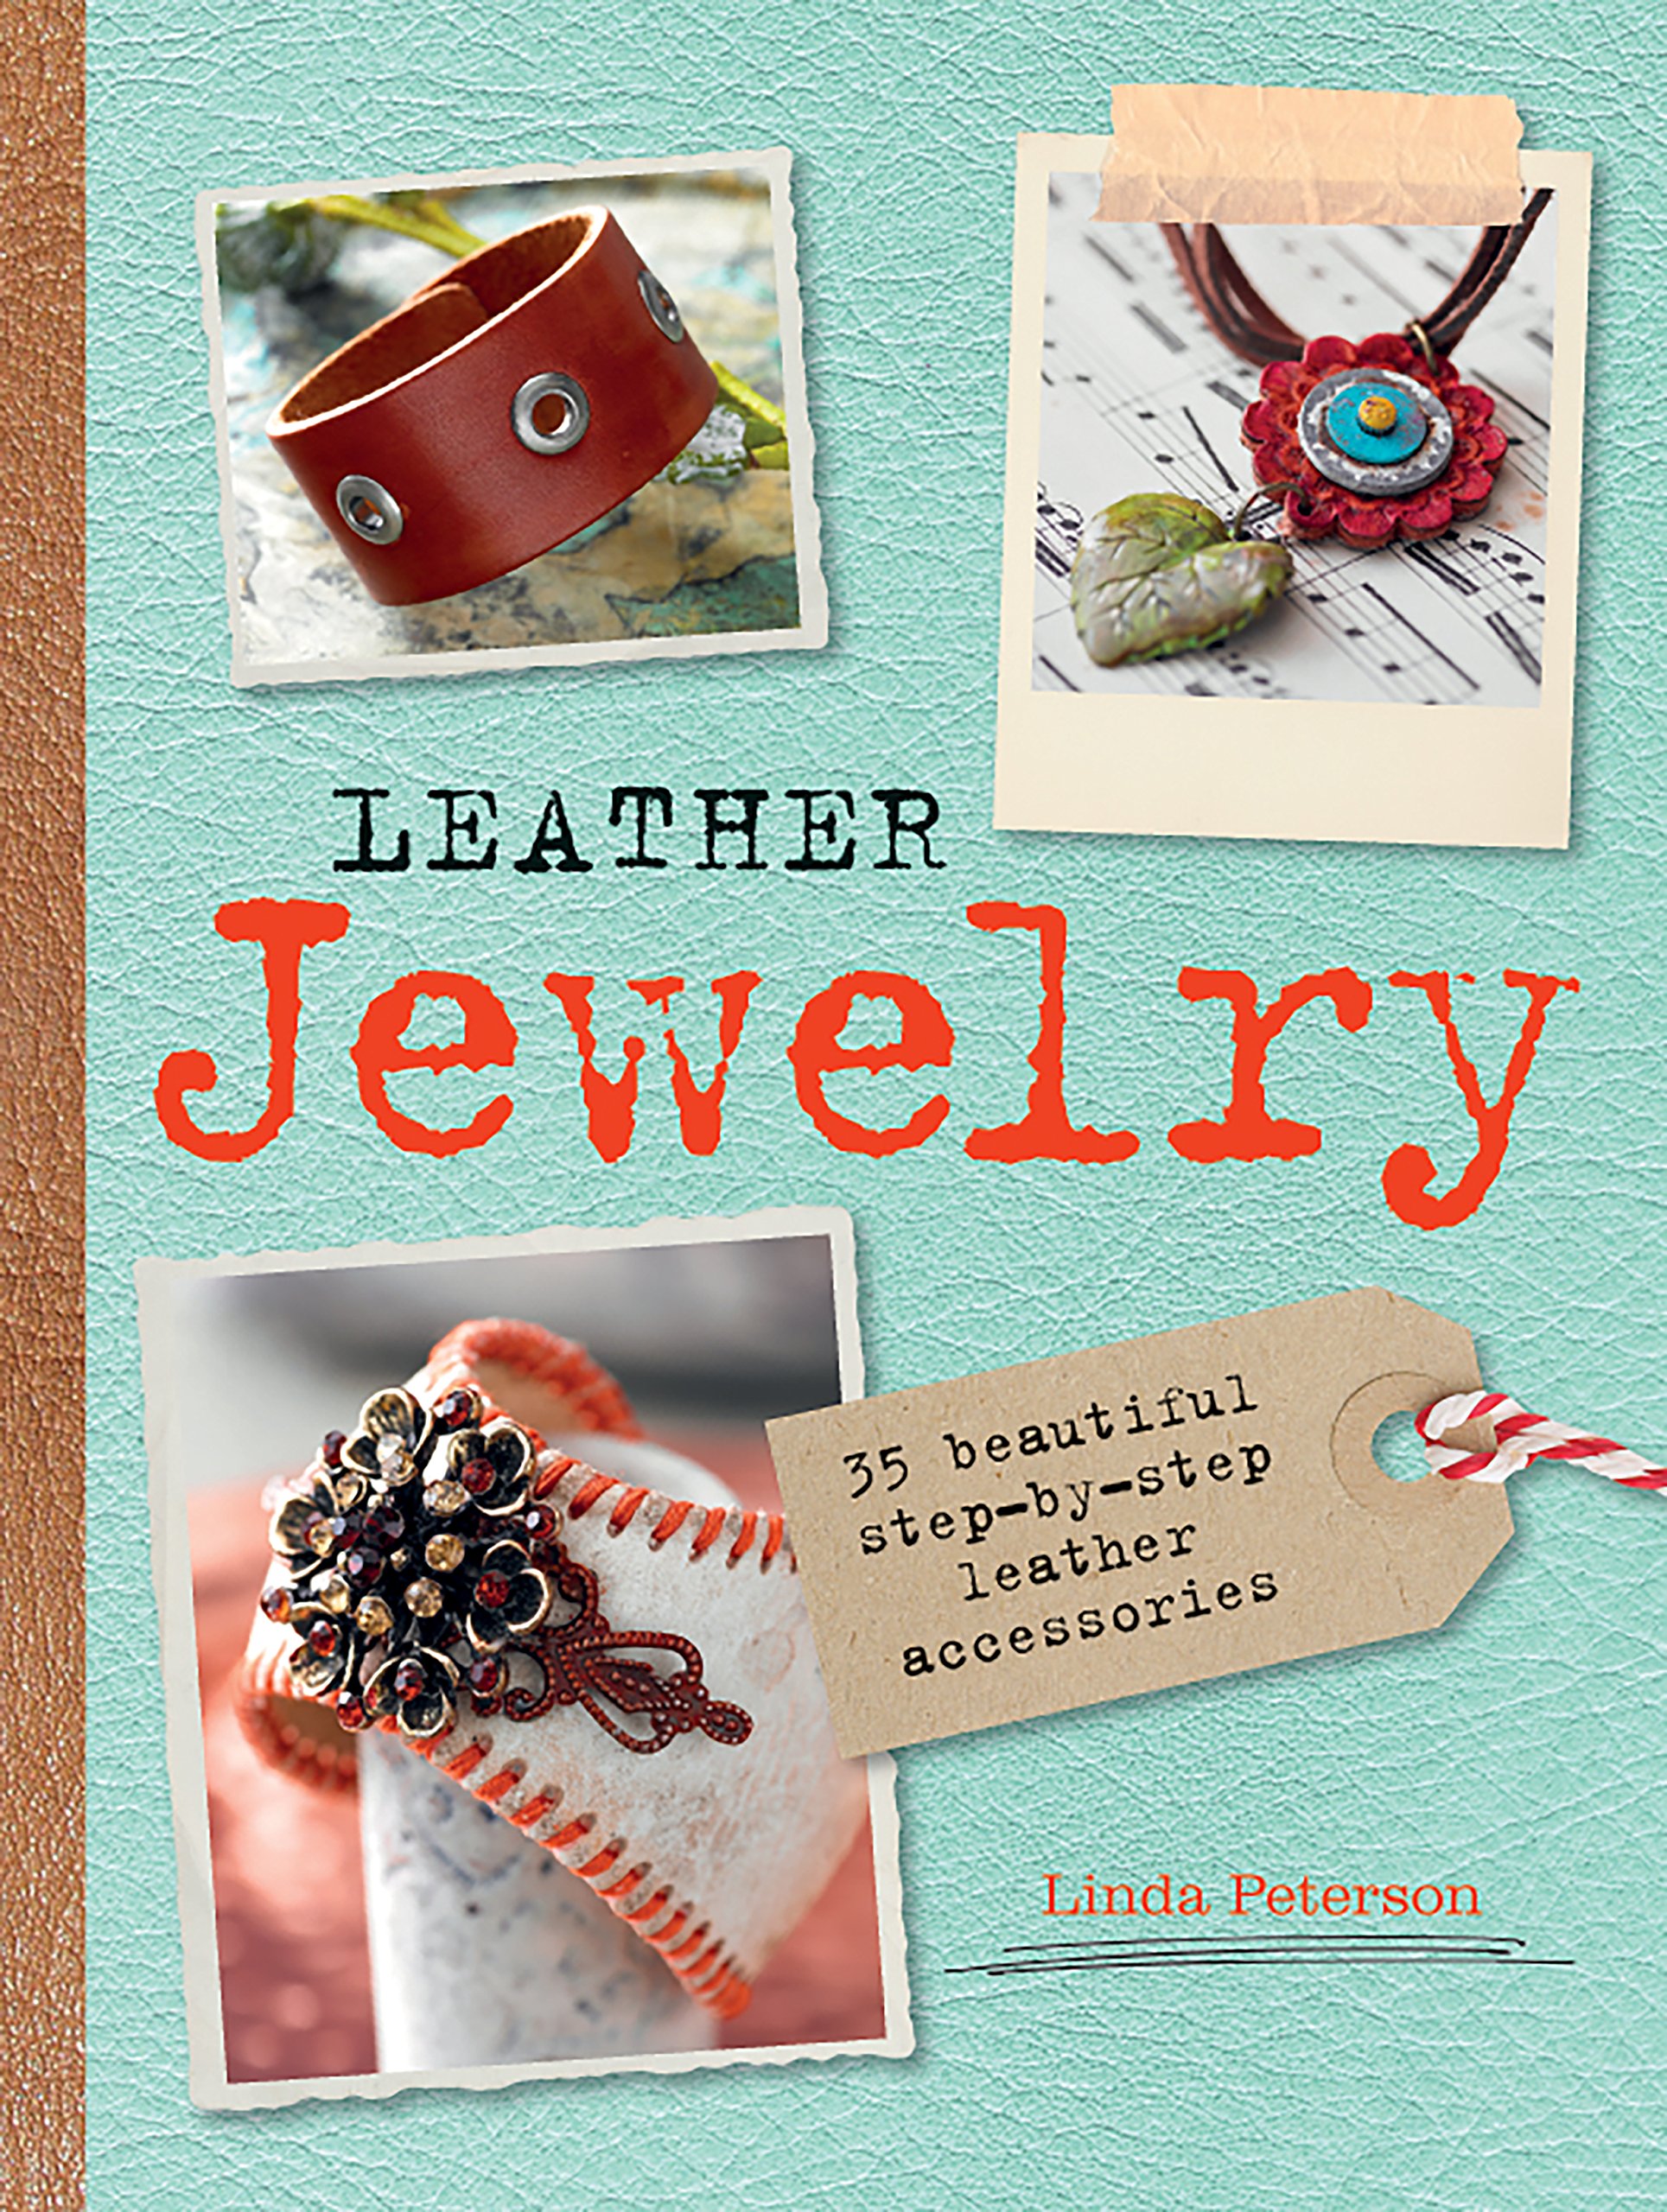 Leather Jewelry - Linda Peterson